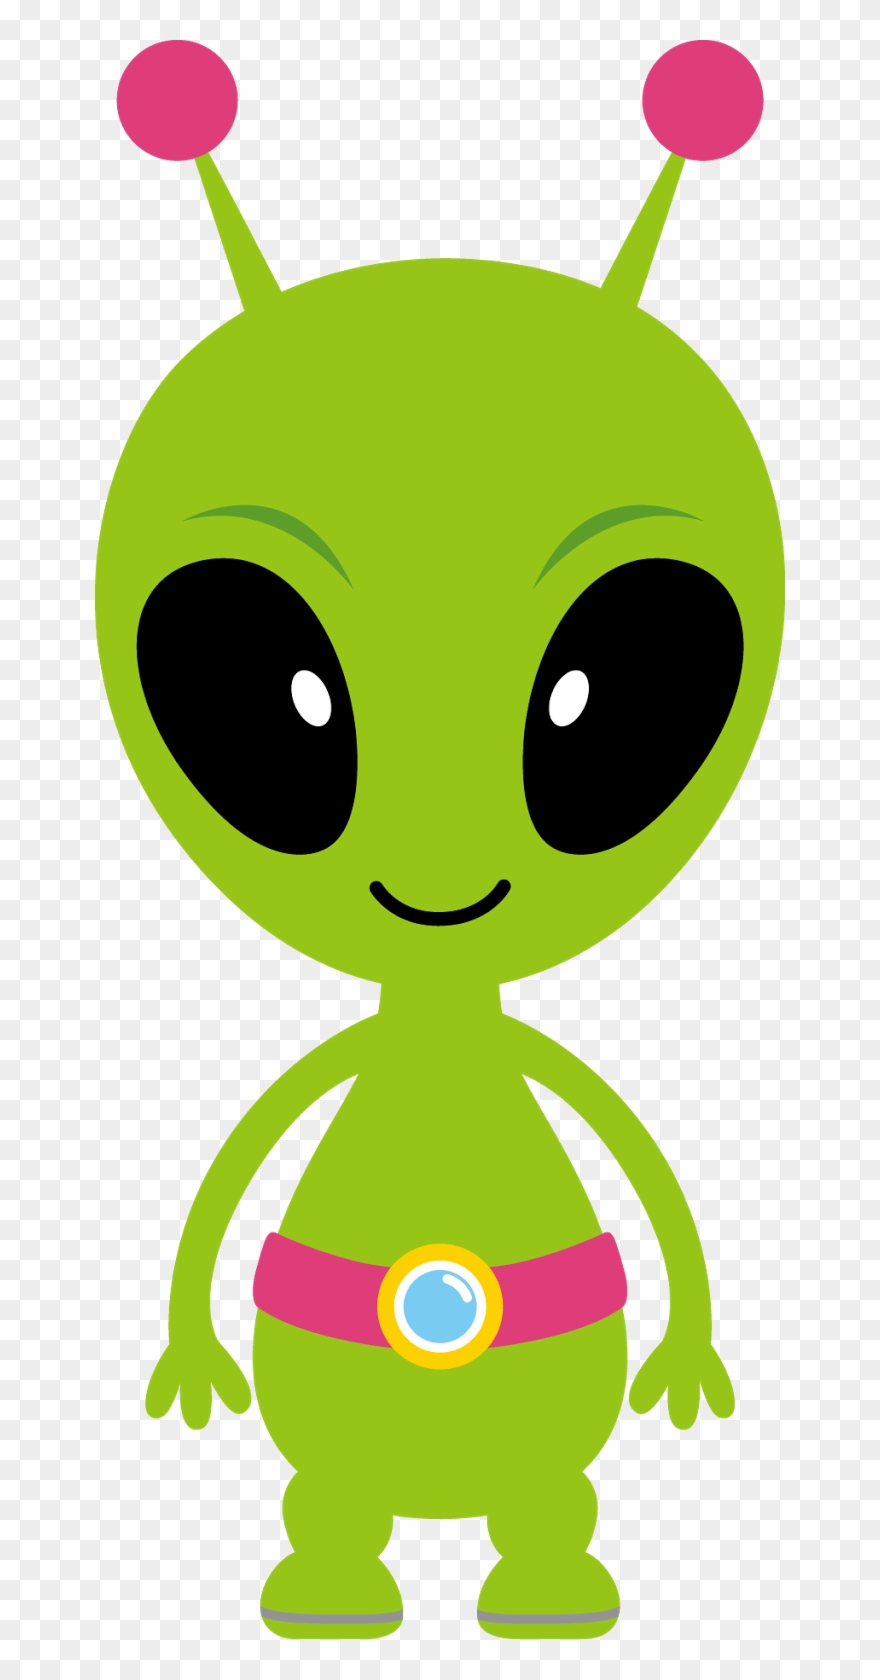 Background of aliens png. Alien clipart